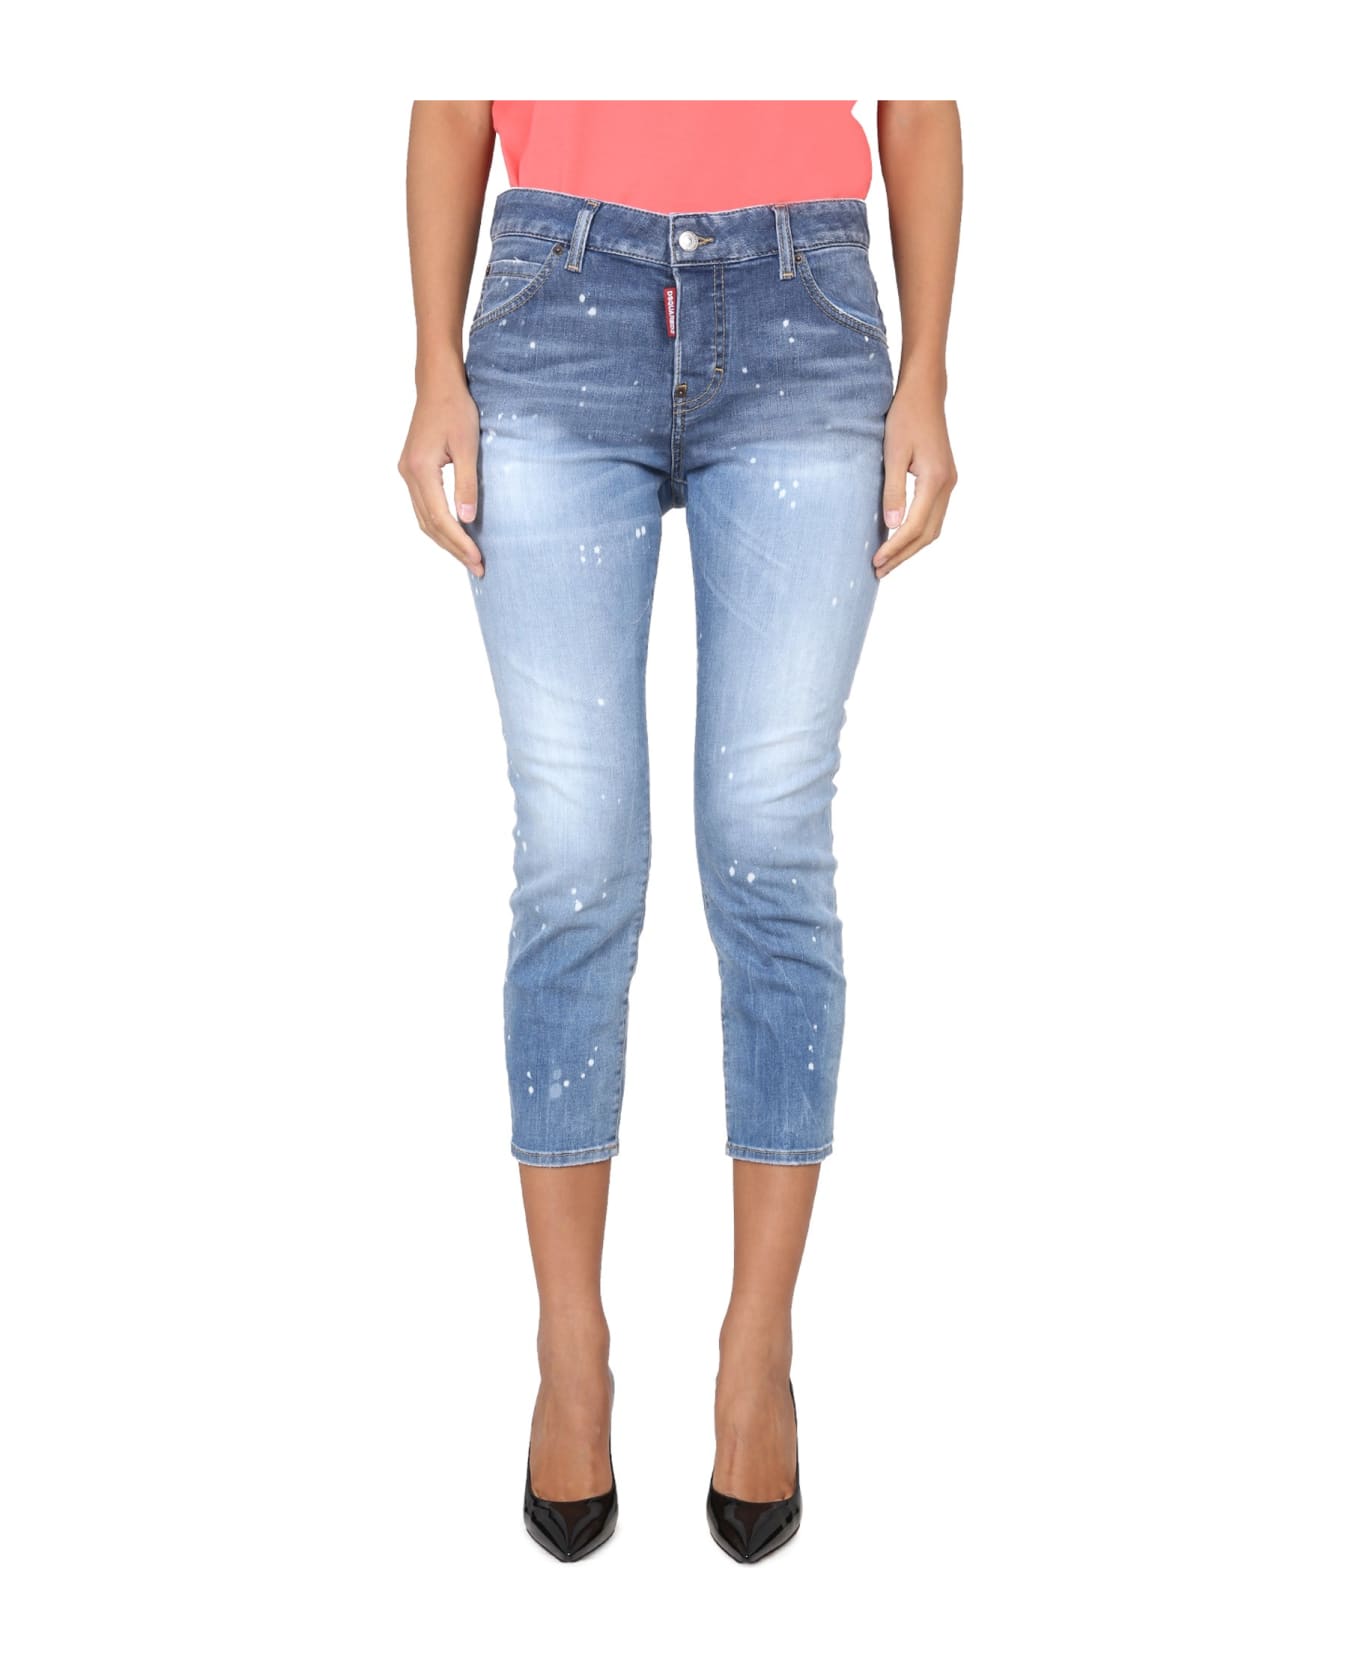 Dsquared2 Cool Girl Crop Jeans - Blue